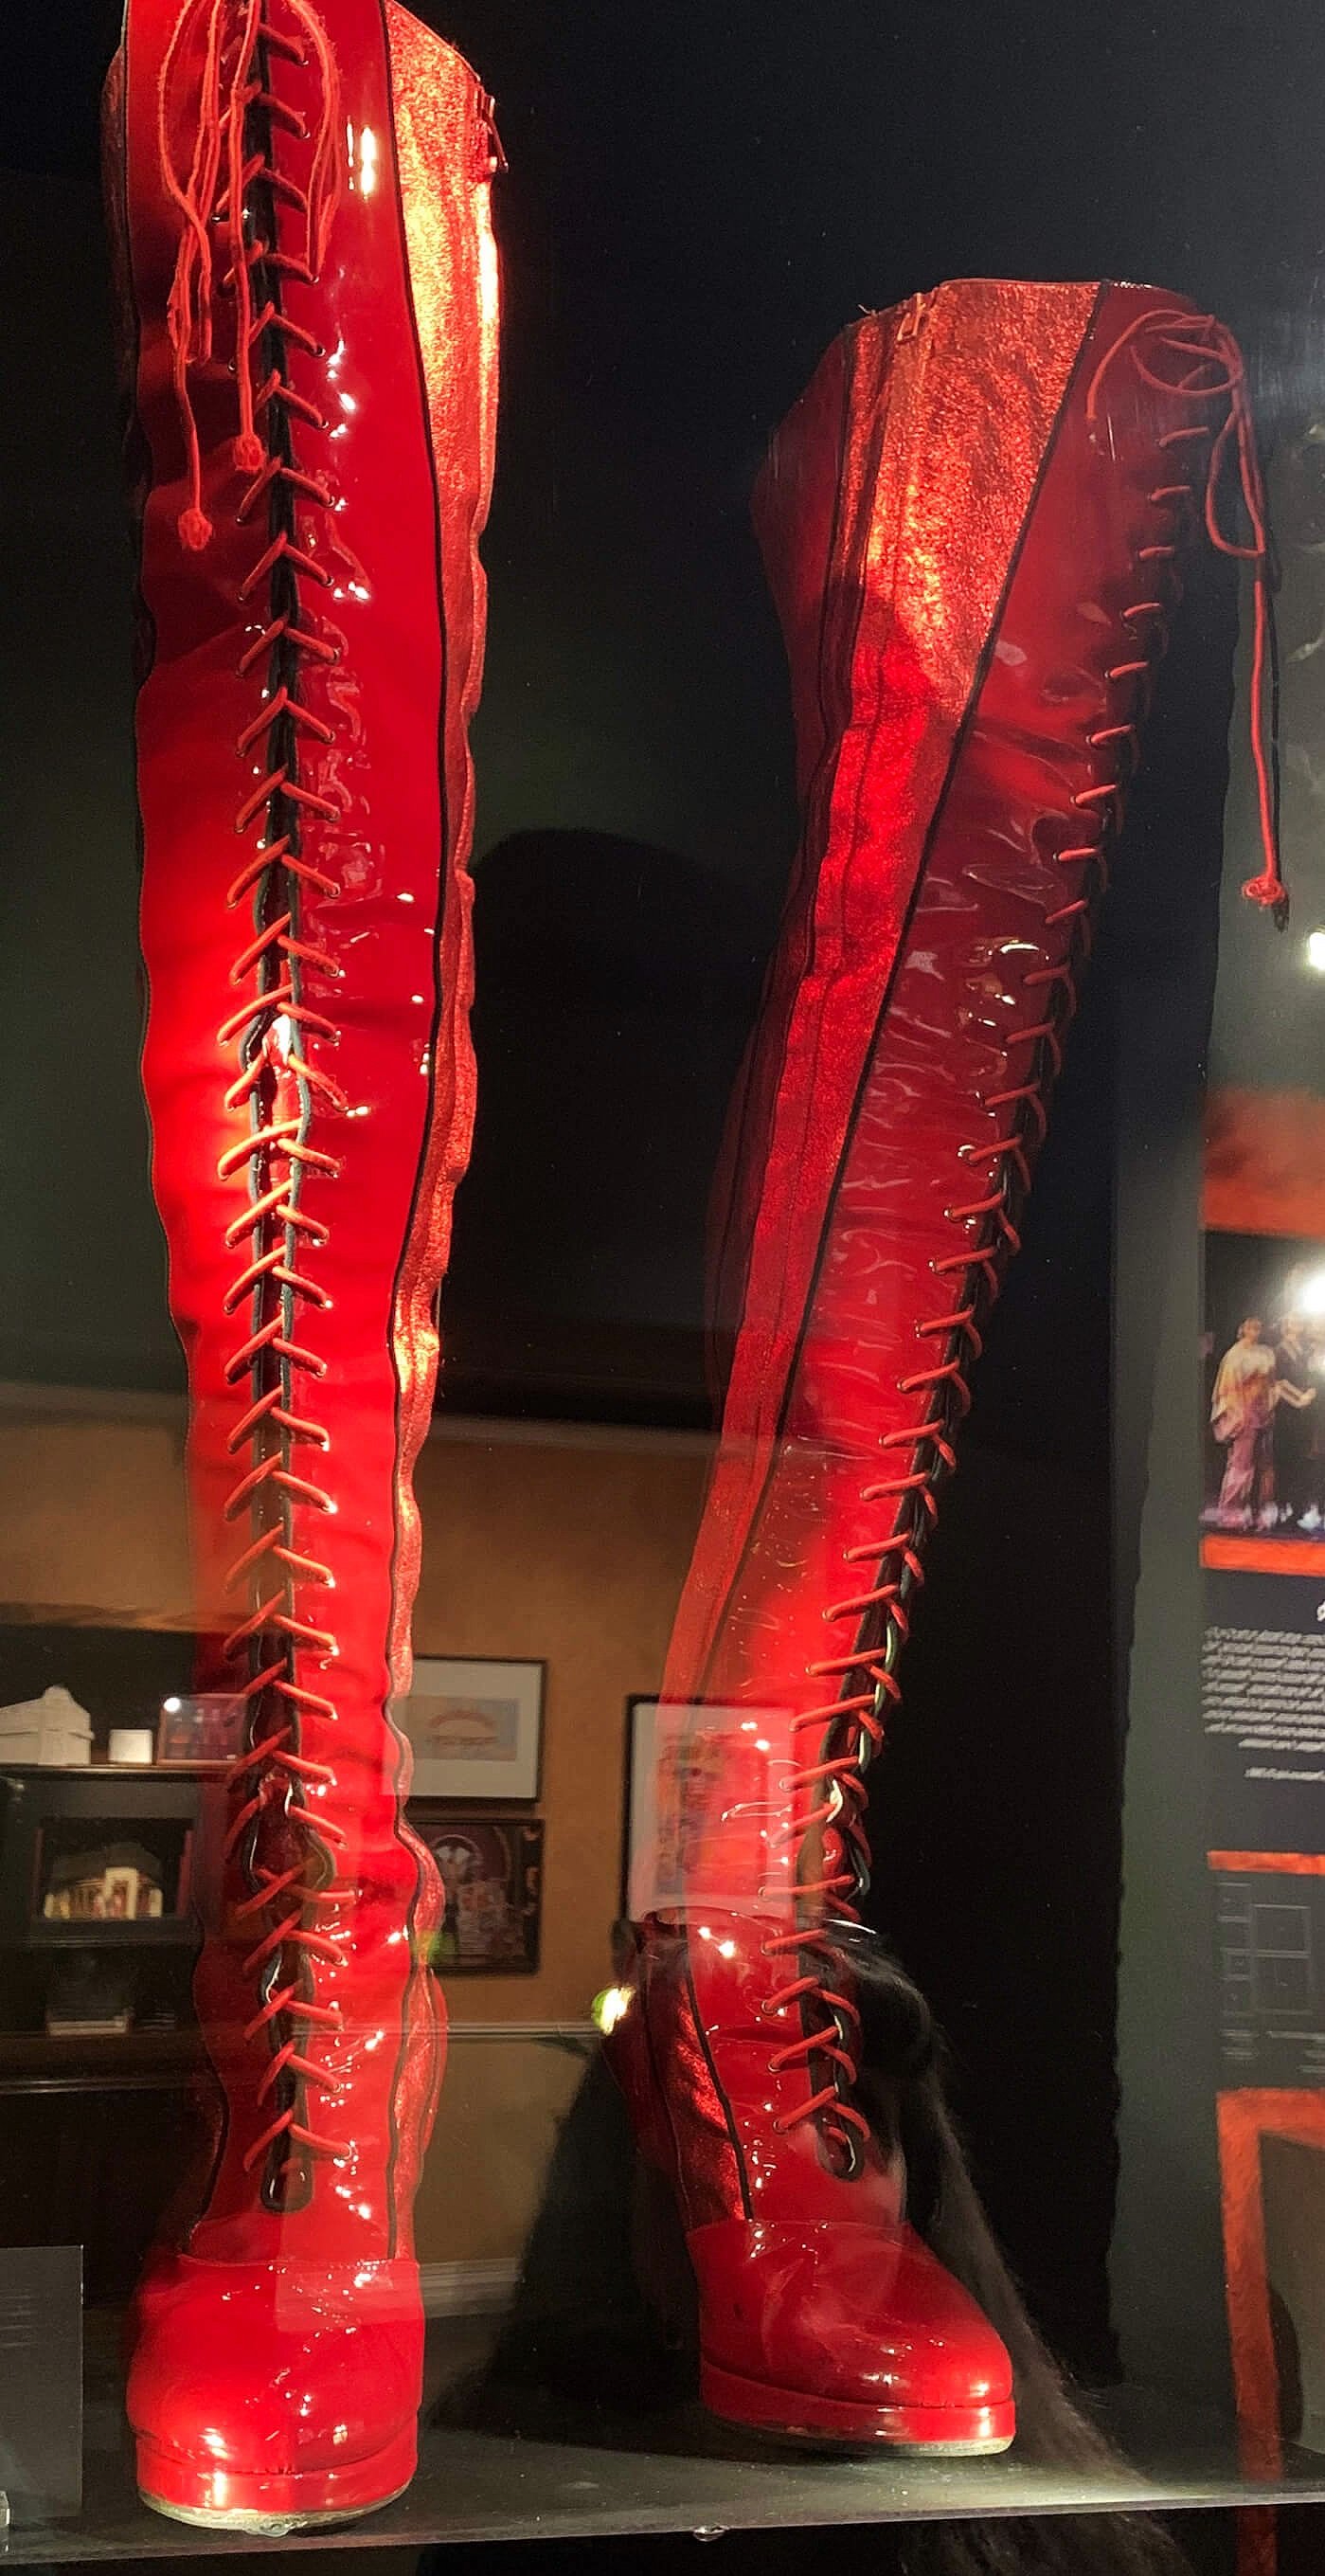  A pair of boots worn in  Kinky Boots   Designed by Gregg Barnes 